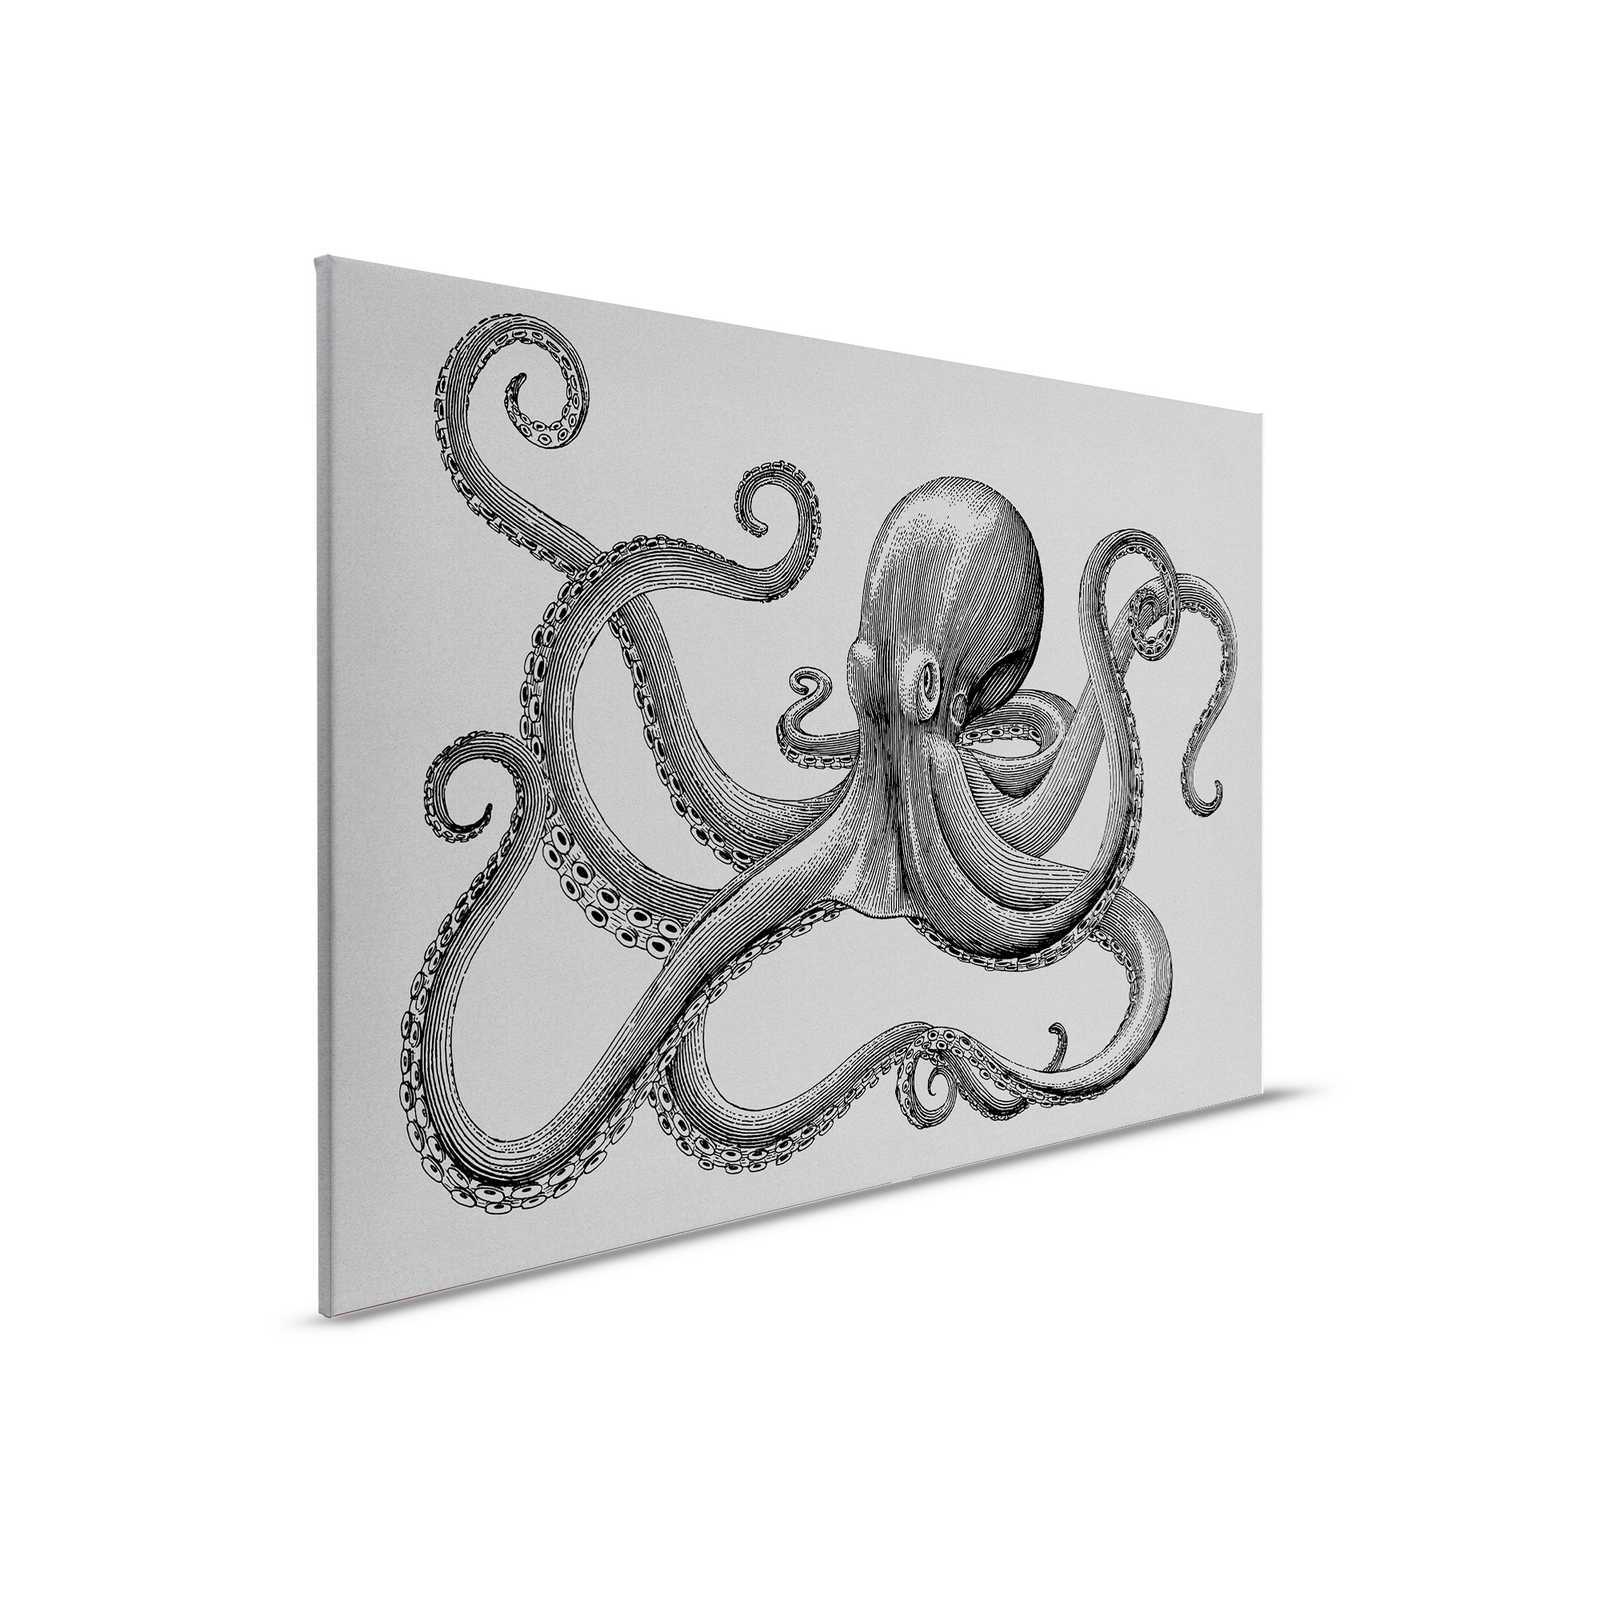         Jules 2 - modern octopus canvas picture in cardboard structure in drawing style - 0.90 m x 0.60 m
    